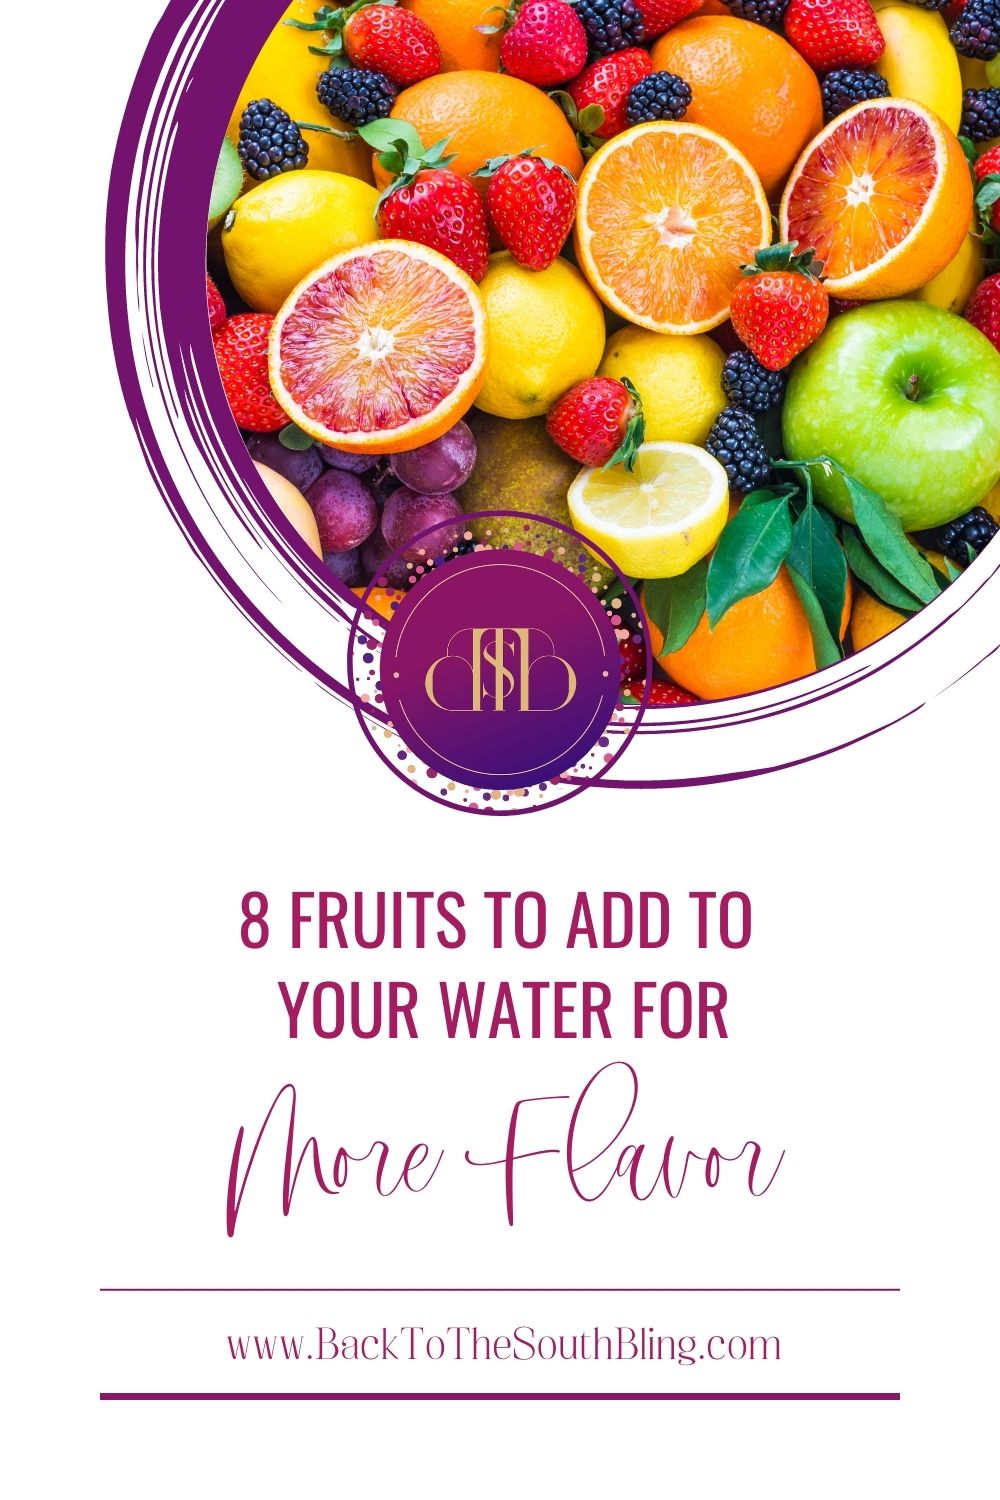 Fruits to add to water